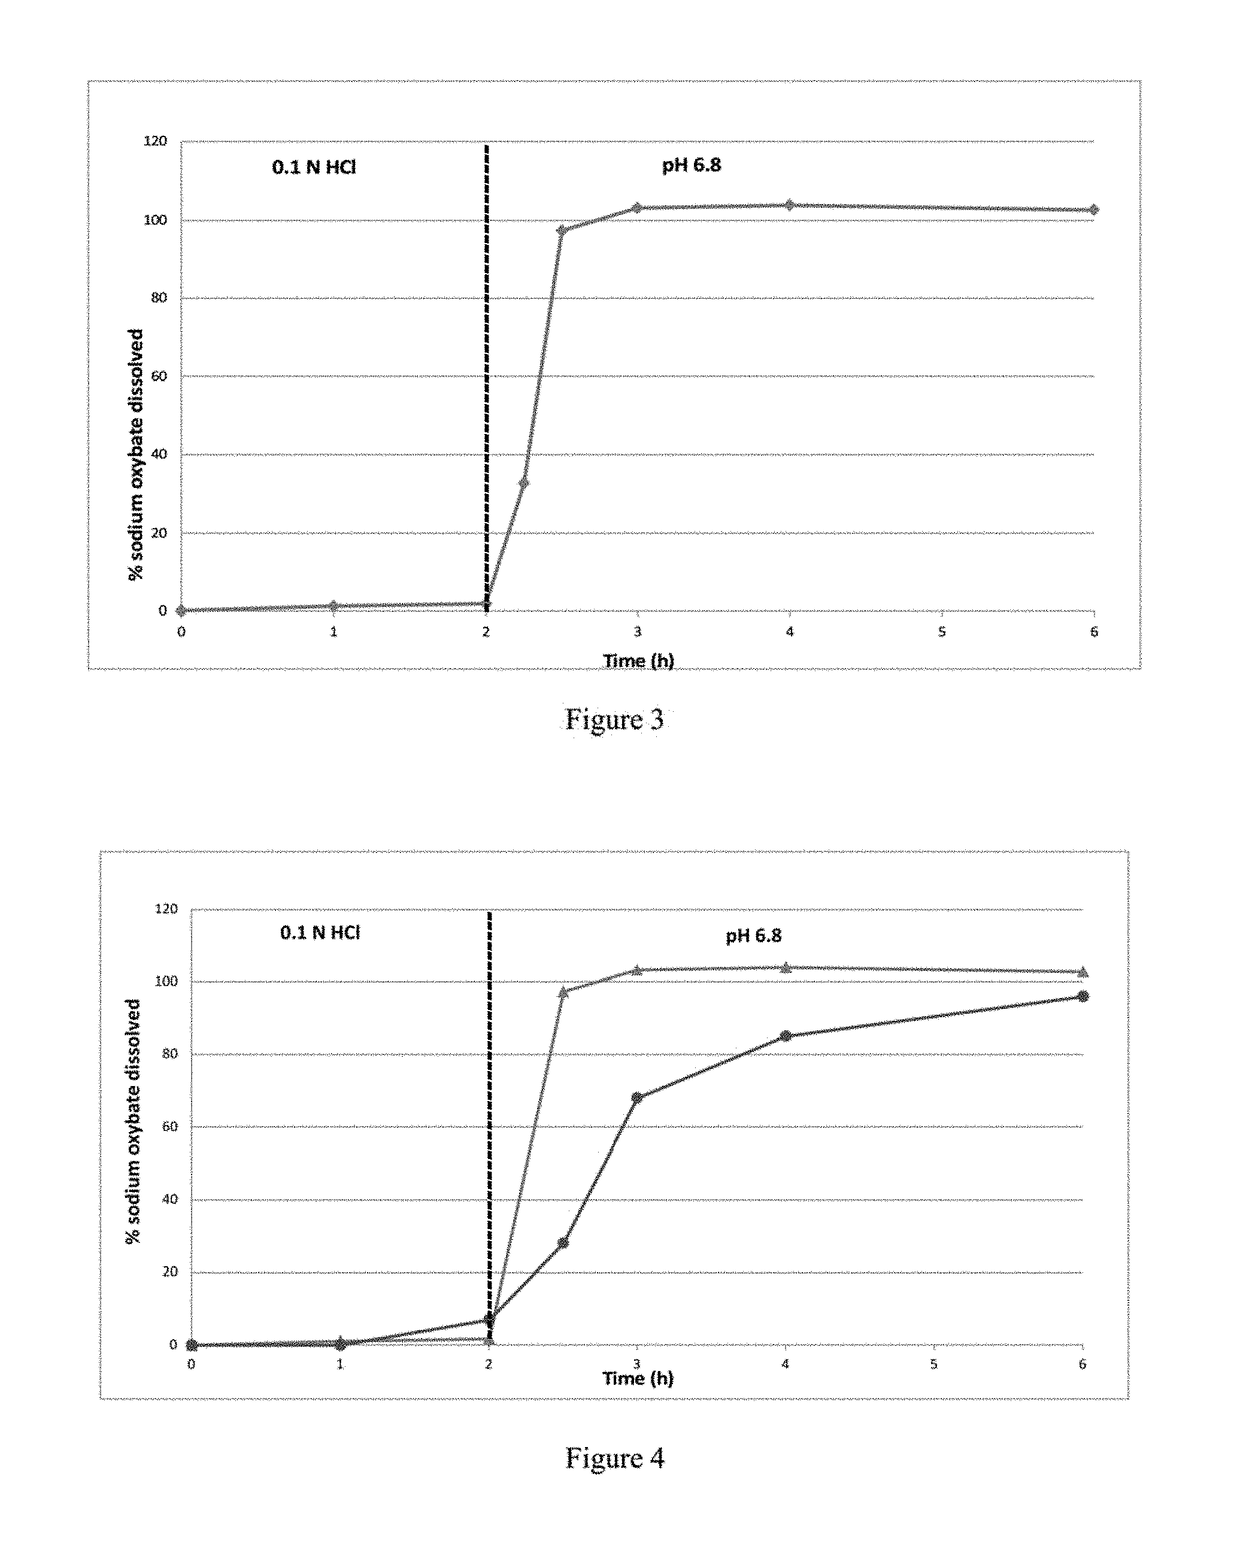 Modified release gamma- hydroxybutyrate formulations having improved pharmacokinetics